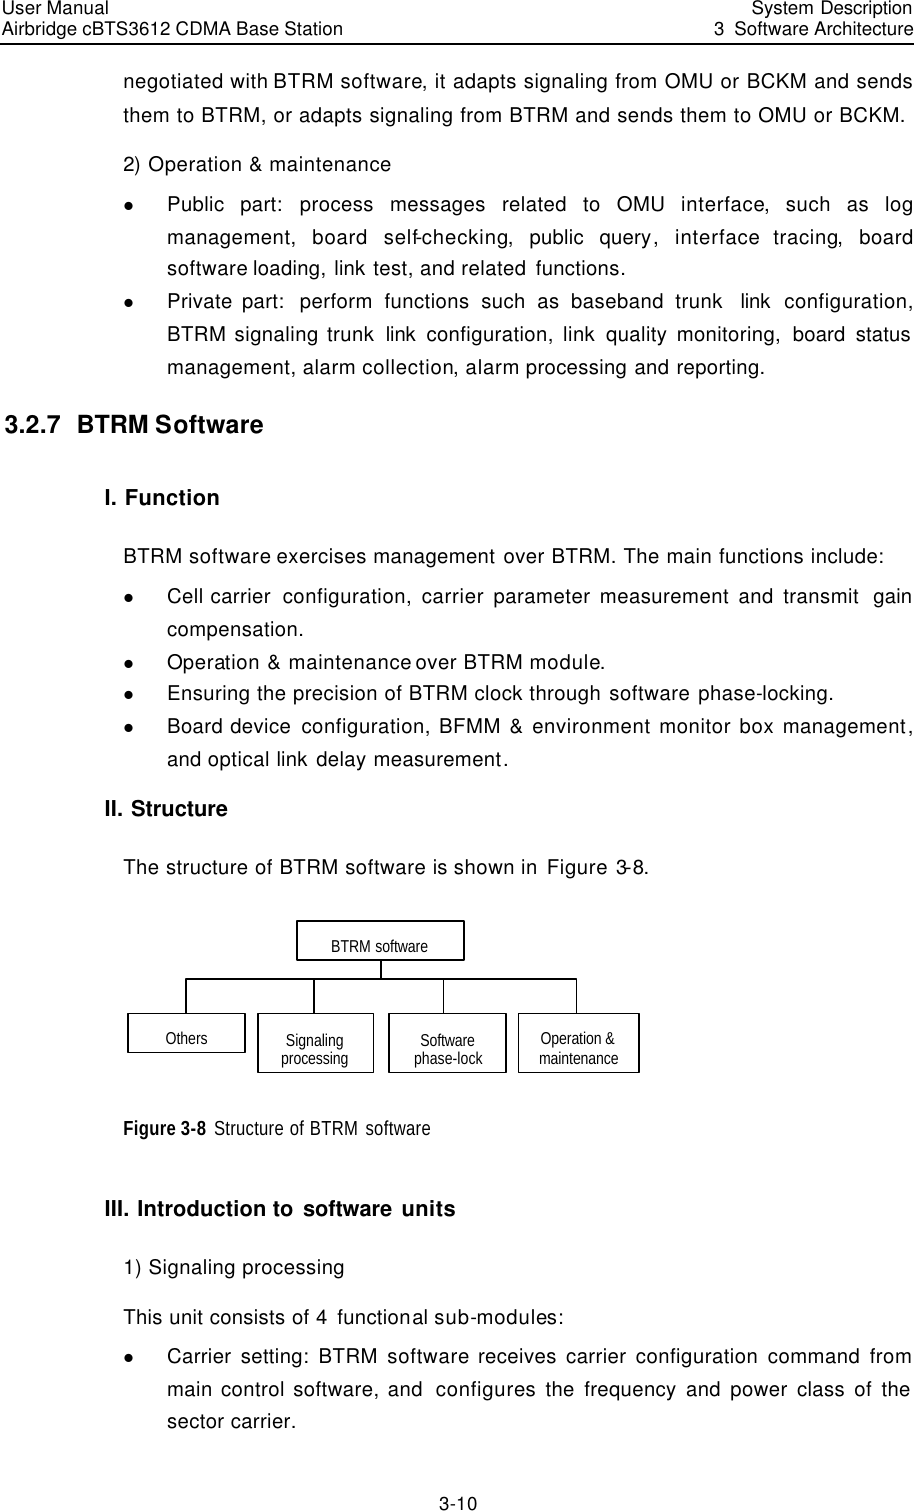 User Manual Airbridge cBTS3612 CDMA Base Station  System Description3  Software Architecture 3-10 negotiated with BTRM software, it adapts signaling from OMU or BCKM and sends them to BTRM, or adapts signaling from BTRM and sends them to OMU or BCKM.  2) Operation &amp; maintenance l Public part: process messages related to OMU interface, such as log management,  board self-checking,  public query, interface tracing,  board software loading, link test, and related functions.  l Private part:  perform functions such as baseband trunk  link configuration, BTRM signaling trunk link configuration, link quality monitoring, board status management, alarm collection, alarm processing and reporting. 3.2.7  BTRM Software I. Function BTRM software exercises management over BTRM. The main functions include: l Cell carrier  configuration, carrier parameter measurement and transmit  gain compensation.  l Operation &amp; maintenance over BTRM module. l Ensuring the precision of BTRM clock through software phase-locking. l Board device configuration, BFMM &amp; environment monitor box management, and optical link delay measurement.  II. Structure The structure of BTRM software is shown in Figure 3-8.  BTRM softwareOthers Operation &amp; maintenanceSoftware phase-lockSignaling processing  Figure 3-8 Structure of BTRM software  III. Introduction to software units 1) Signaling processing This unit consists of 4 functional sub-modules:  l Carrier setting: BTRM software receives carrier configuration command from main control software, and  configures the frequency and power class of the sector carrier. 